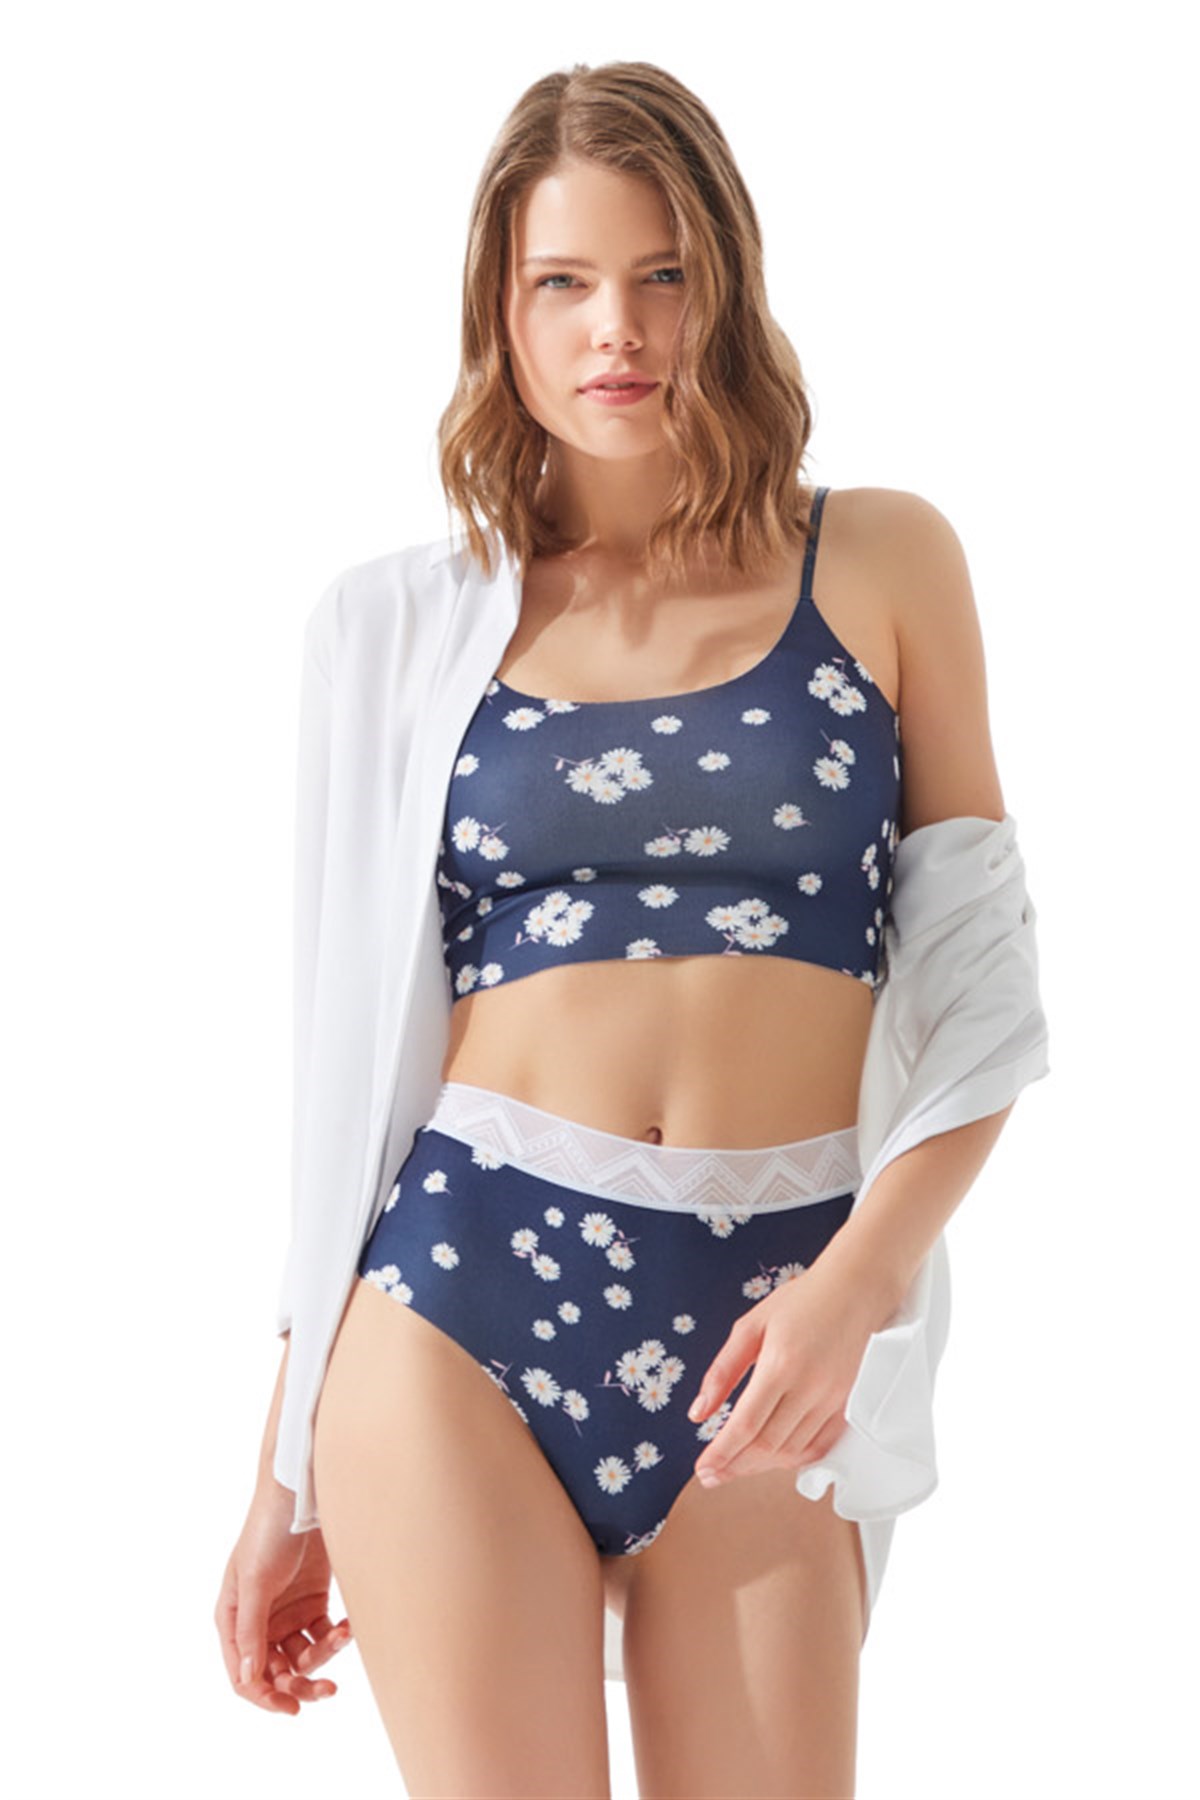 navy-blue-white-daisy-patterned-laser-cut-women-crop-top-with-adjustable-straps-ch1753-dsn-17-1